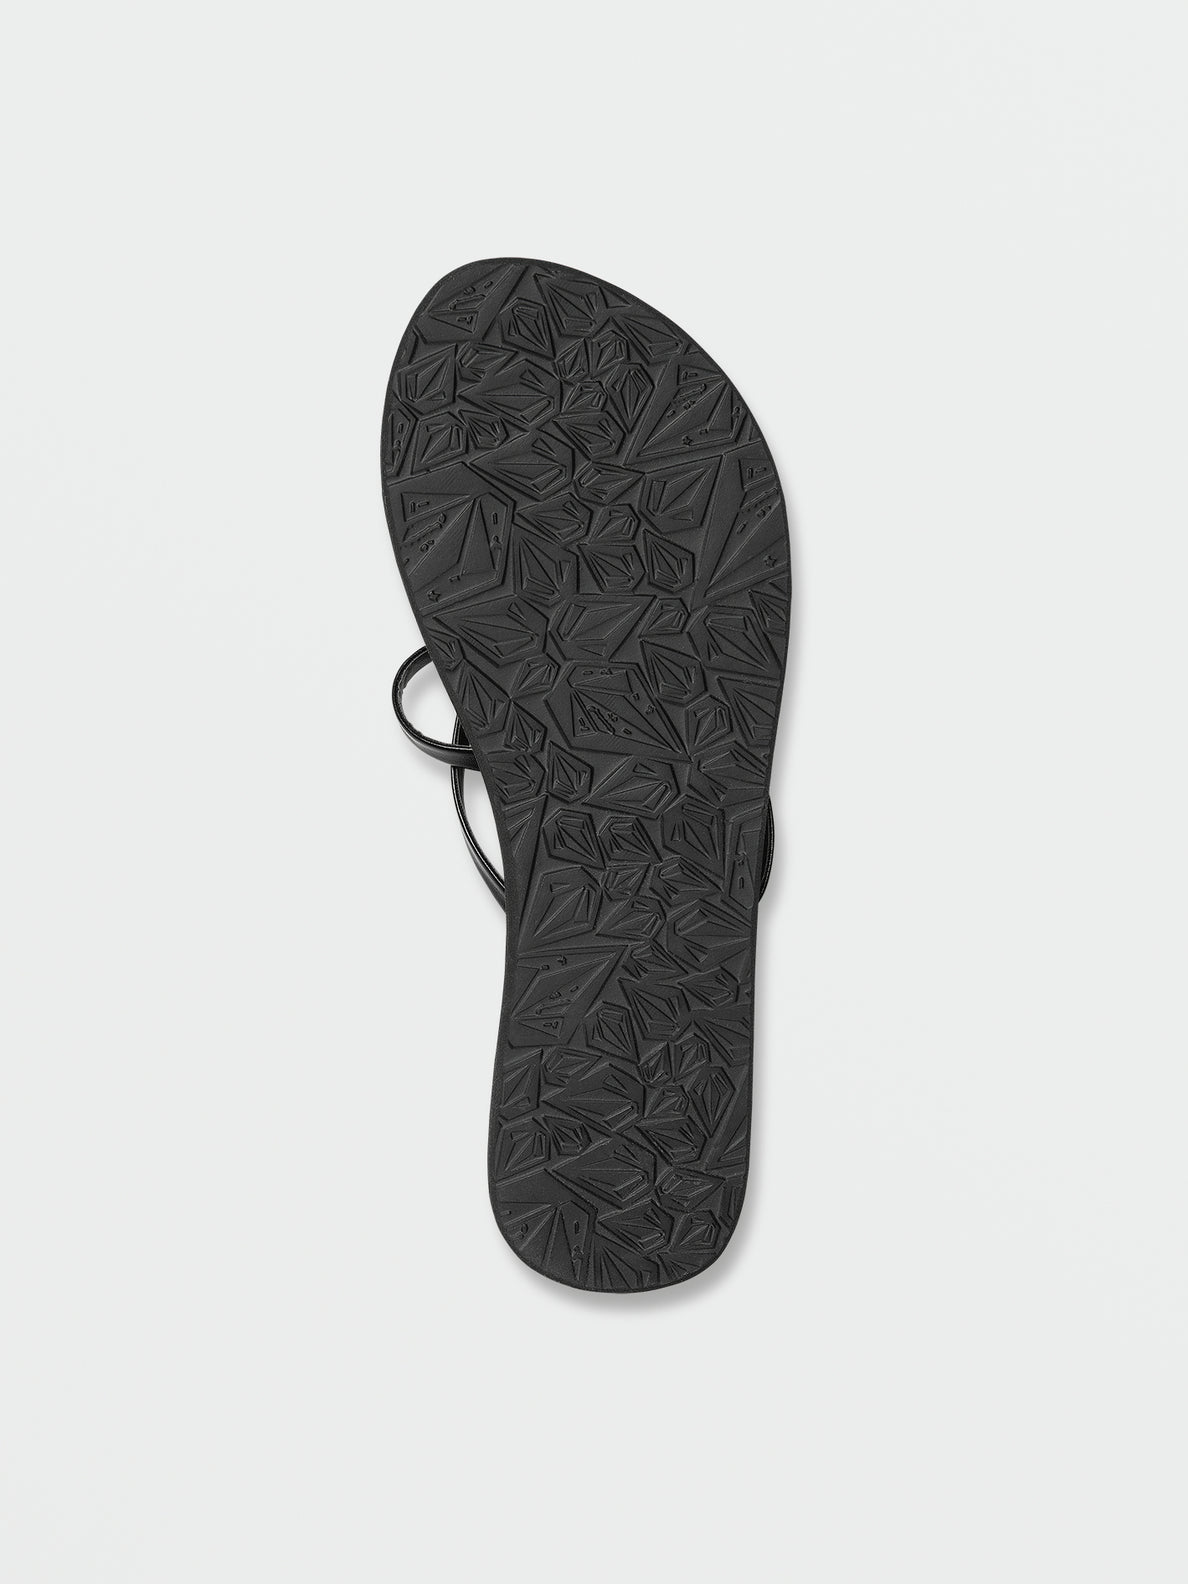 All Day Long Sandal - Black Out